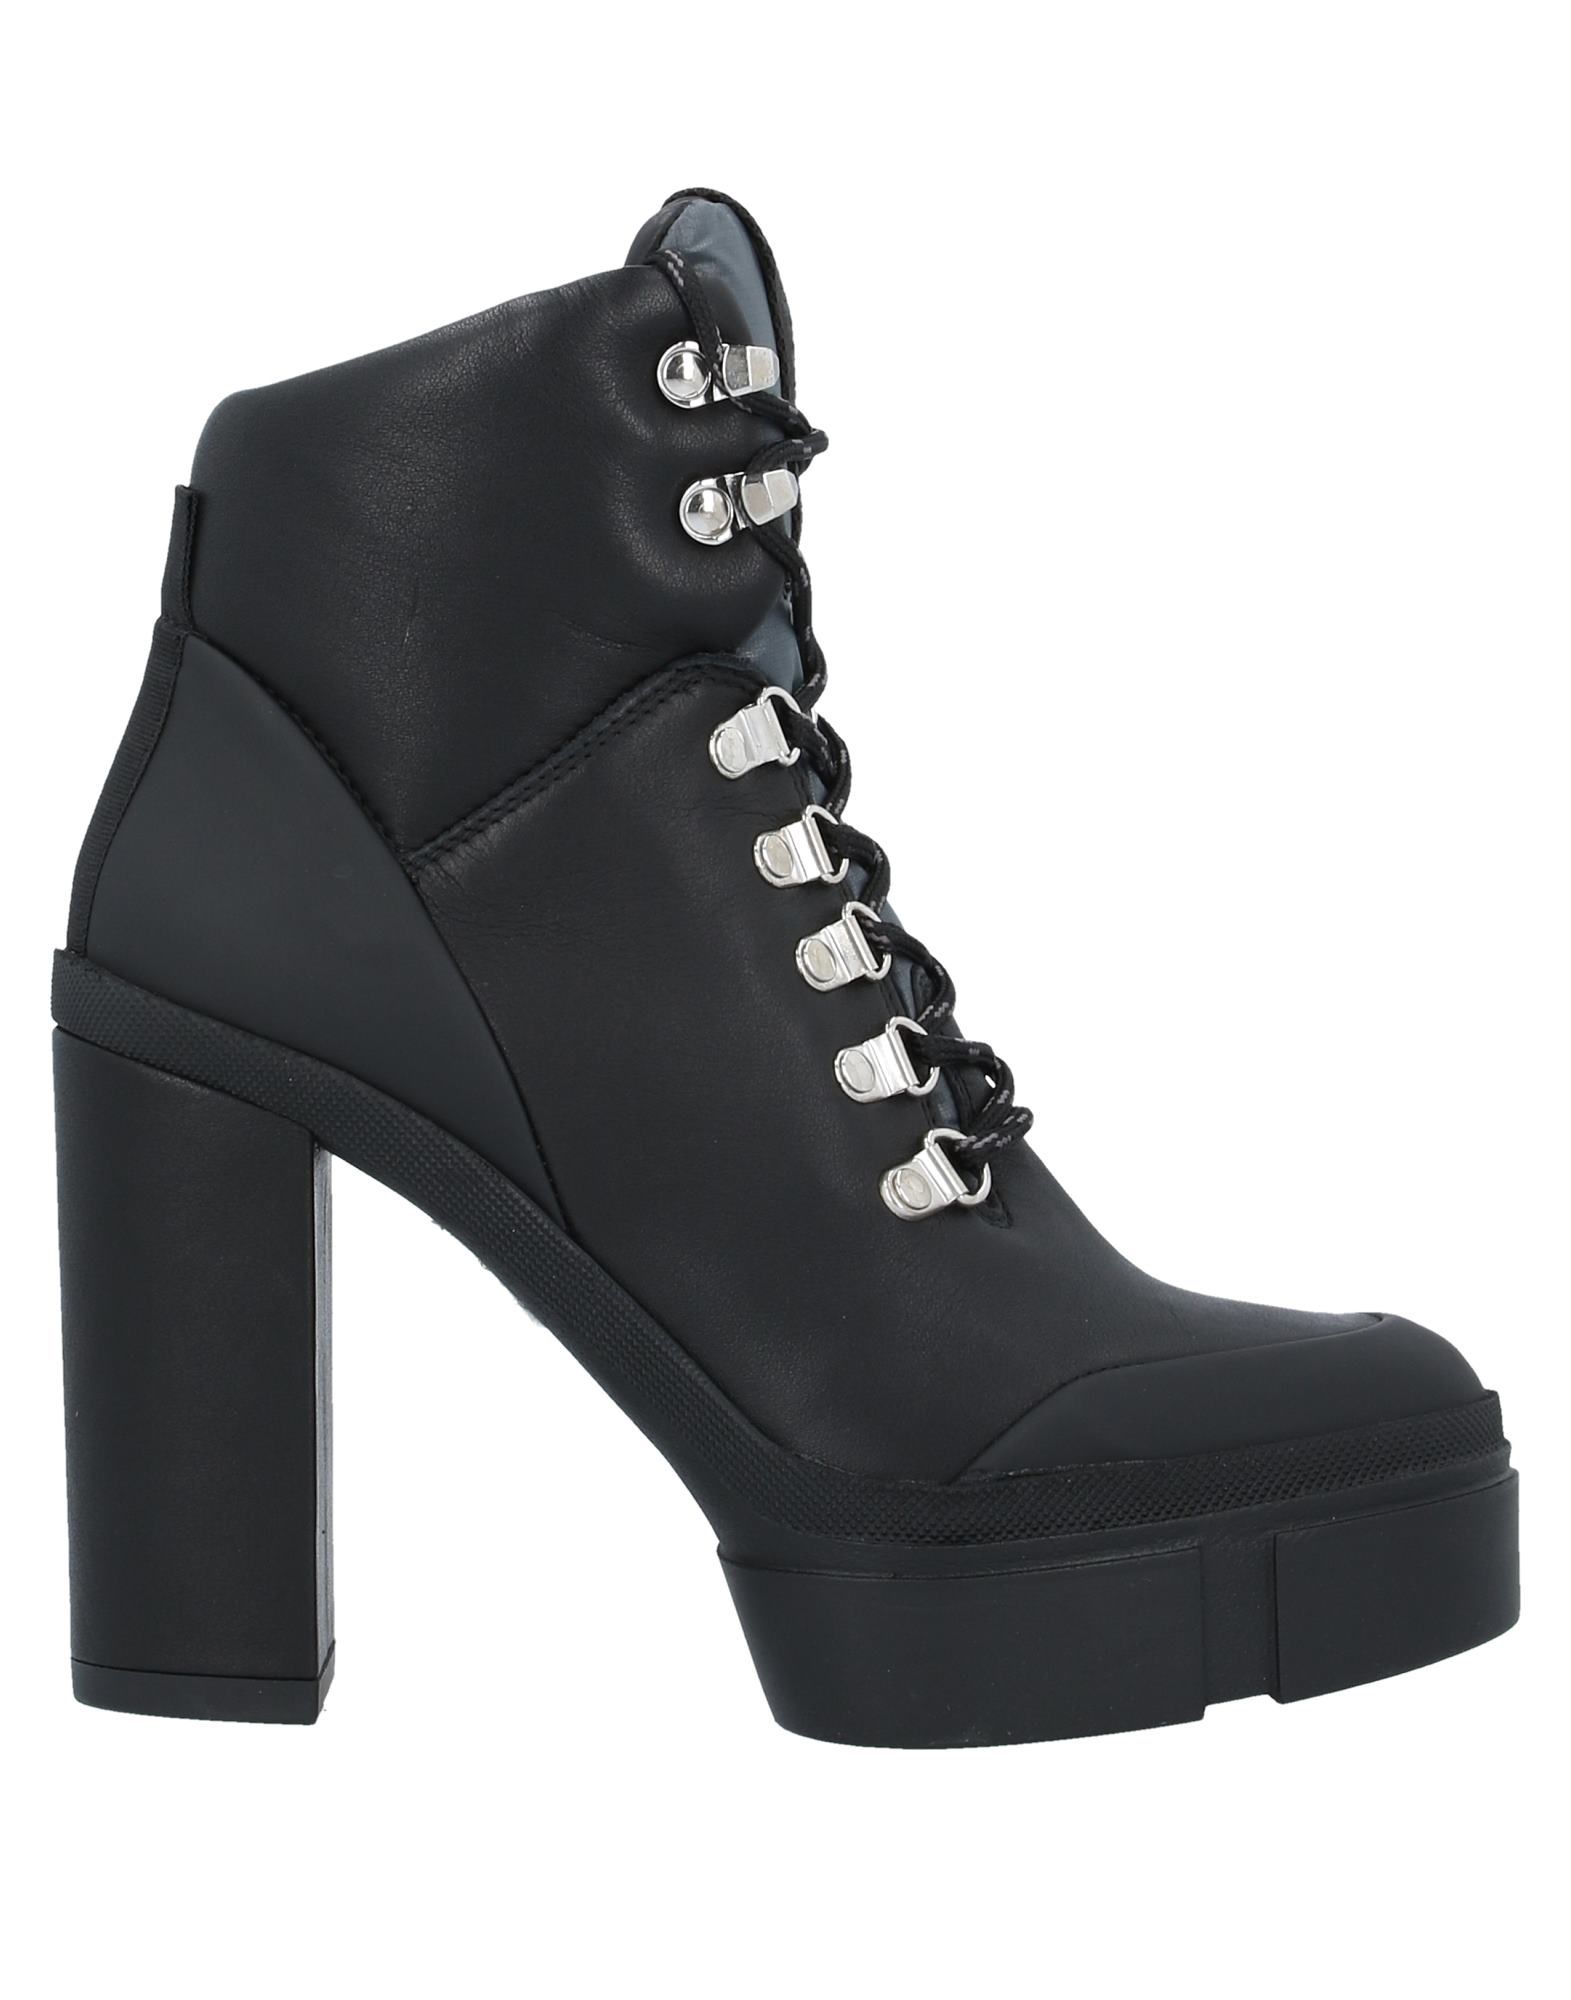 VIC MATIE Ankle boots - Item 11866636